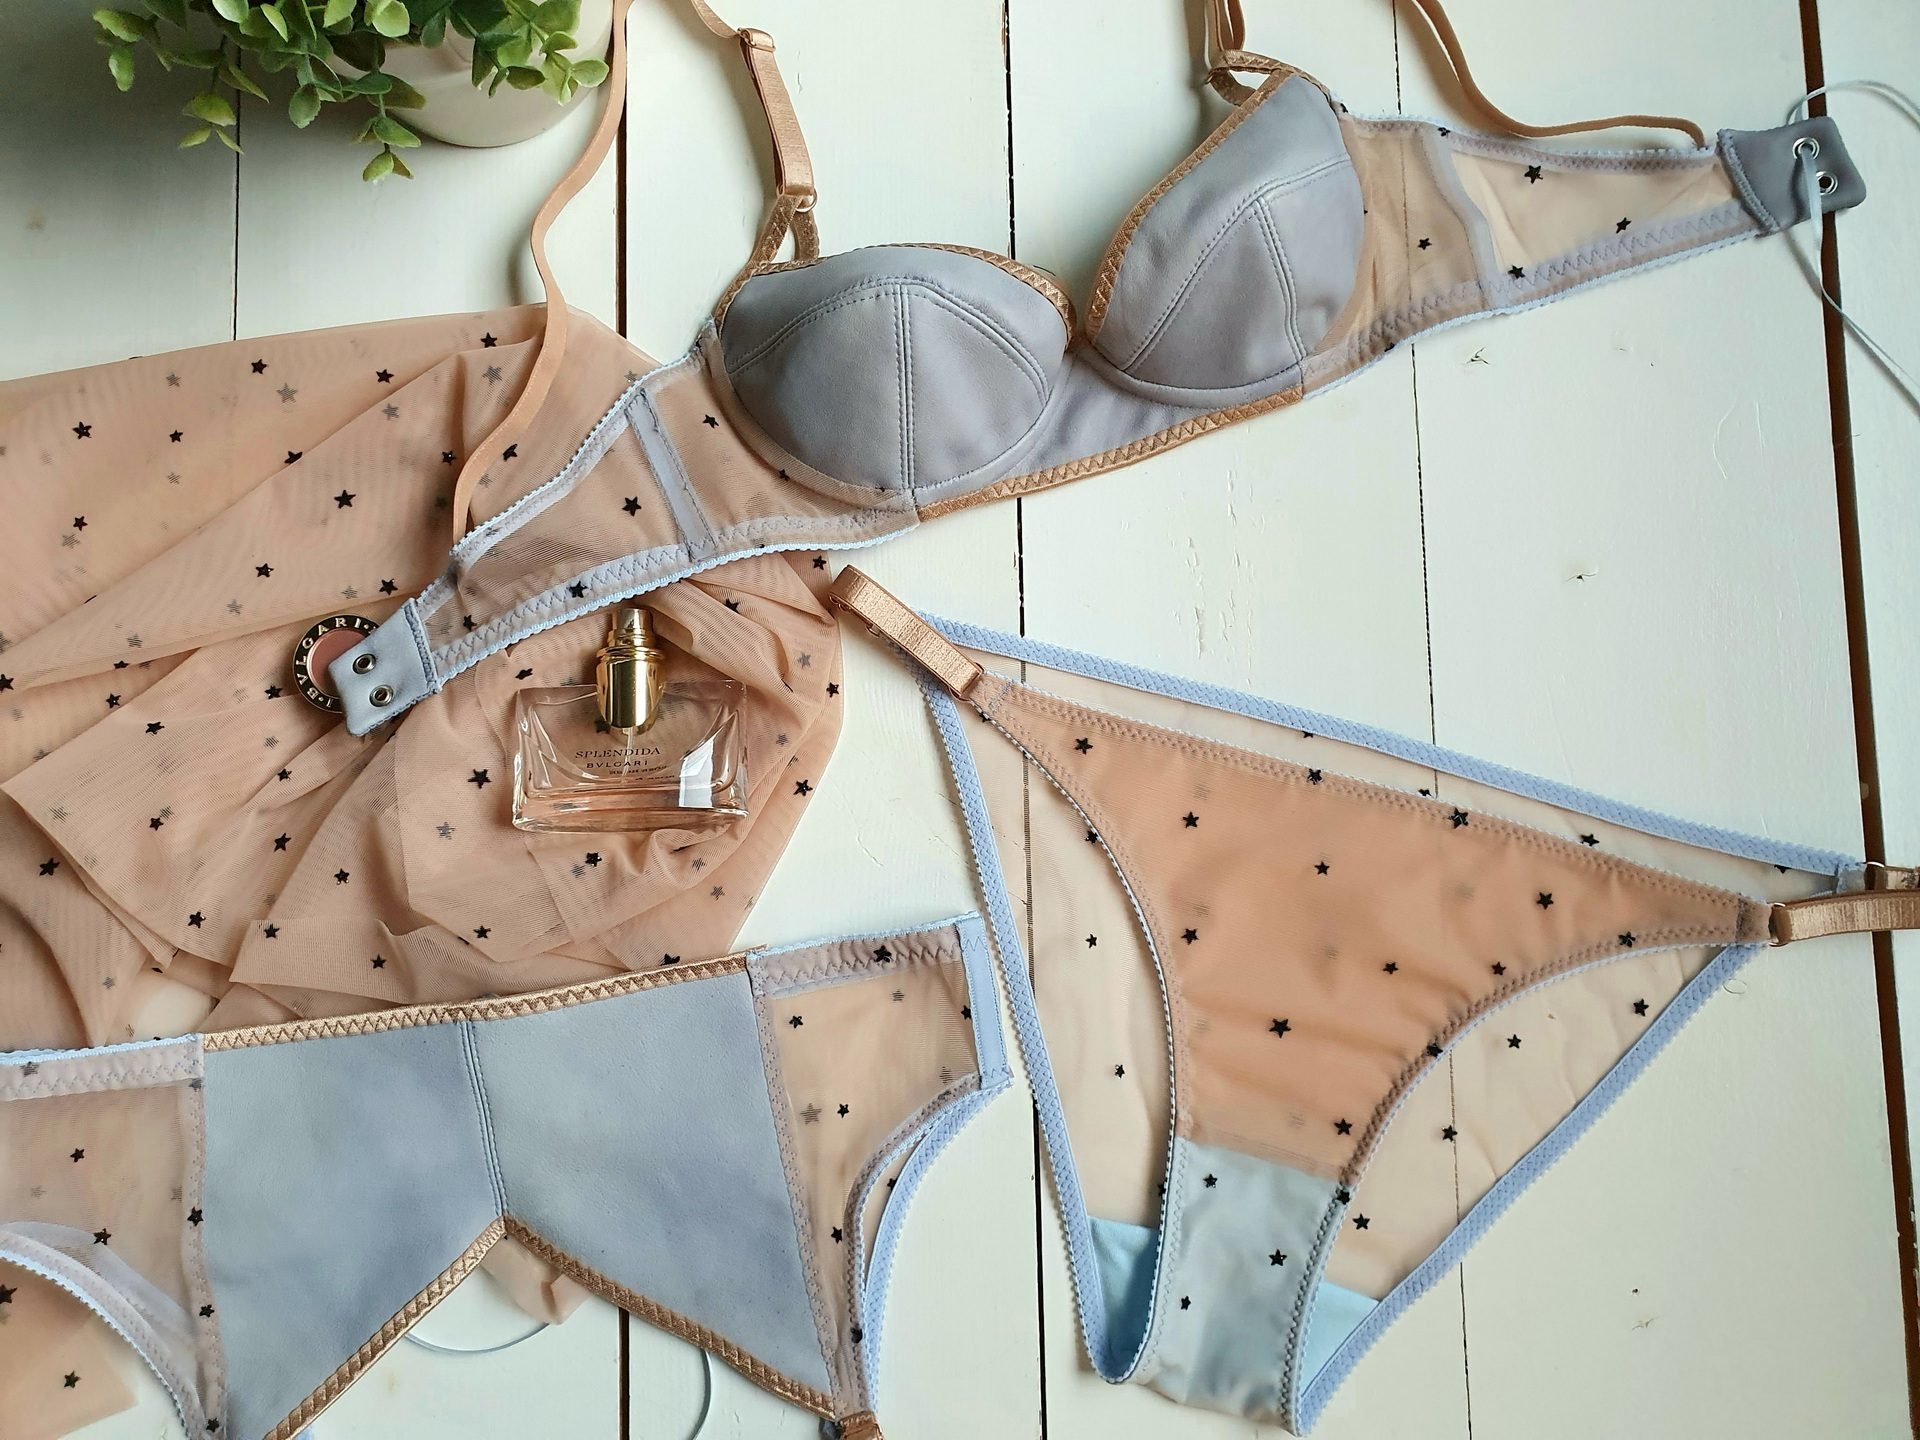 How To Make Lingerie